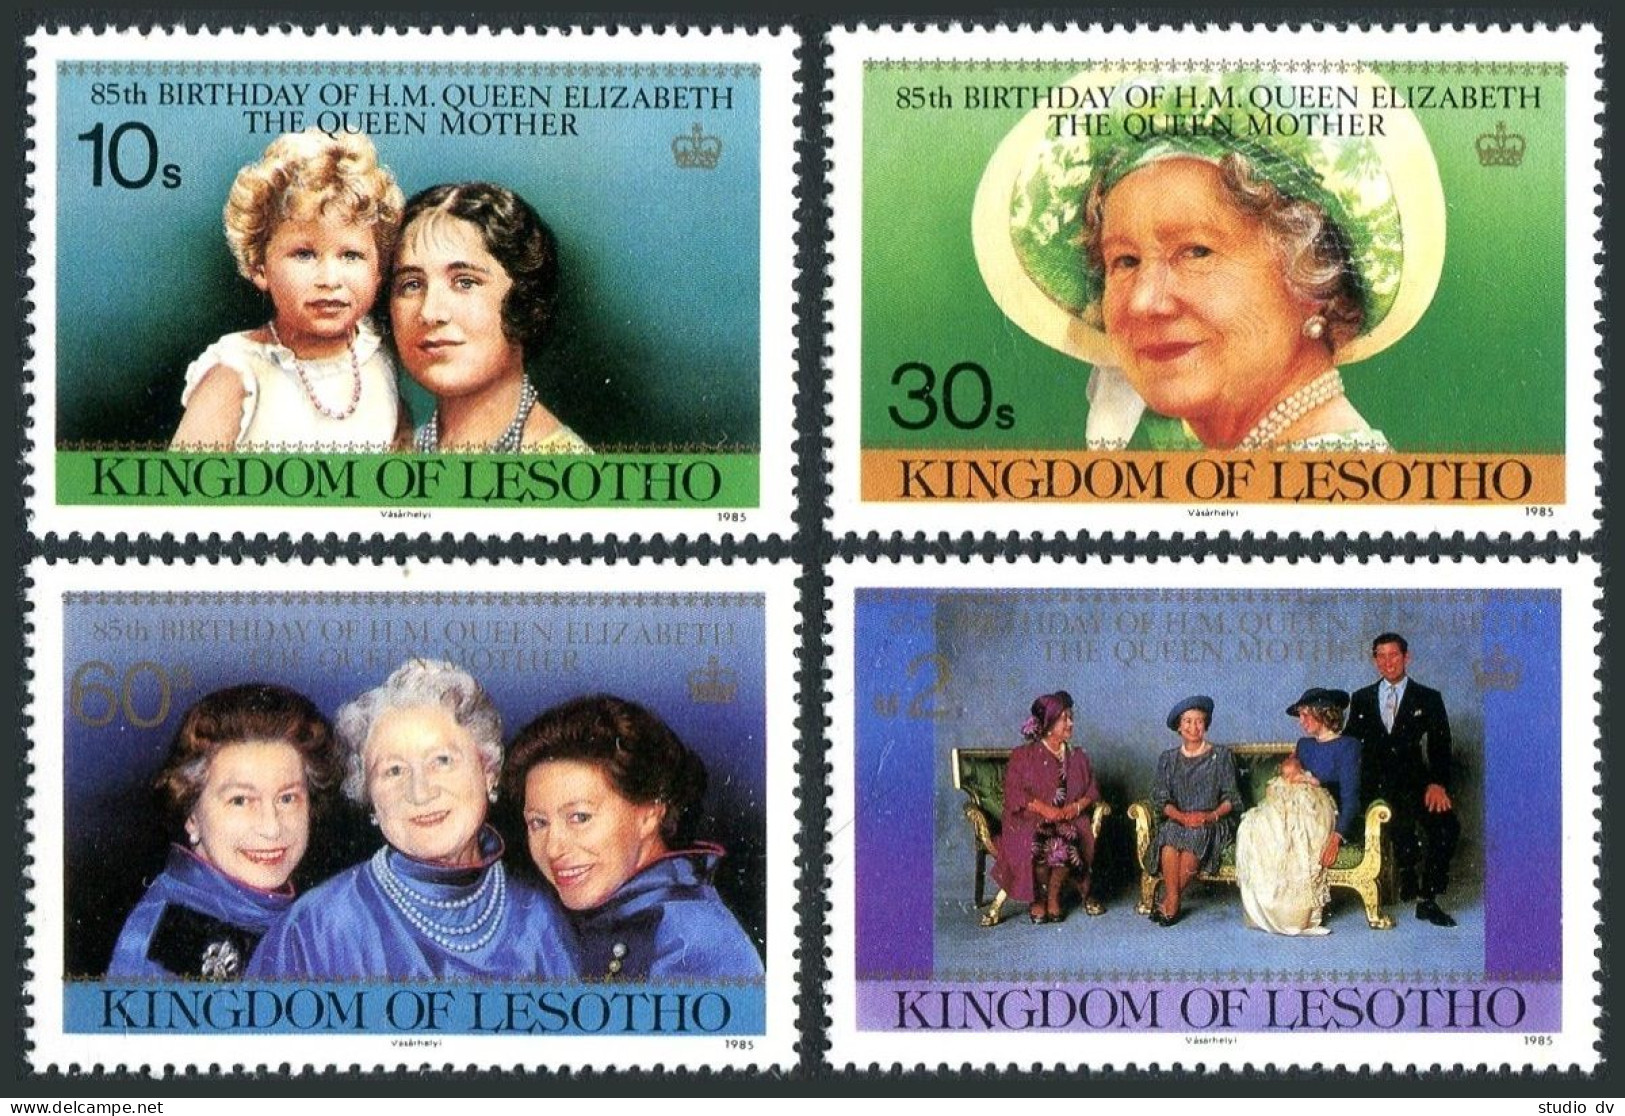 Lesotho 470-473, MNH. Mi 514-517. Queen Mother, 85th Birthday,1985. Photographs. - Lesotho (1966-...)